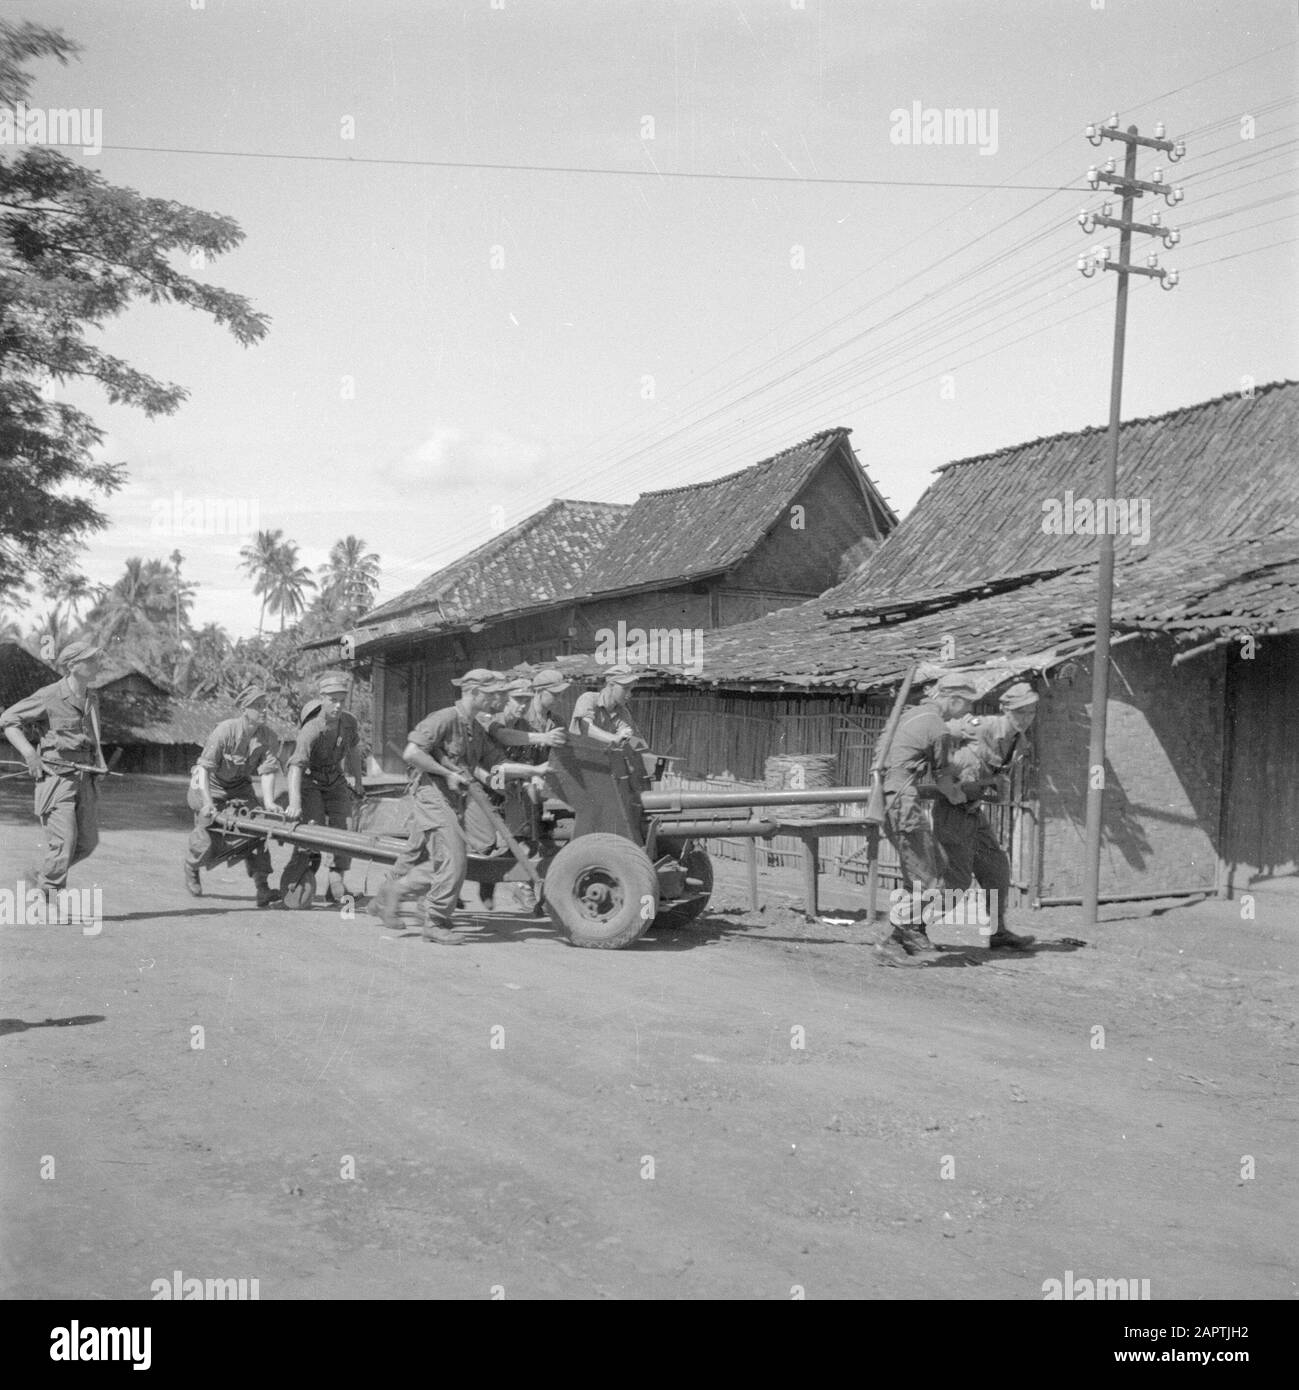 War volunteers in Malacca and Indonesia  Setting up light artillery in a kampong Date: March 1946 Location: Indonesia, Indonesia, Java, Dutch East Indies Keywords: artillery, villages, military Stock Photo